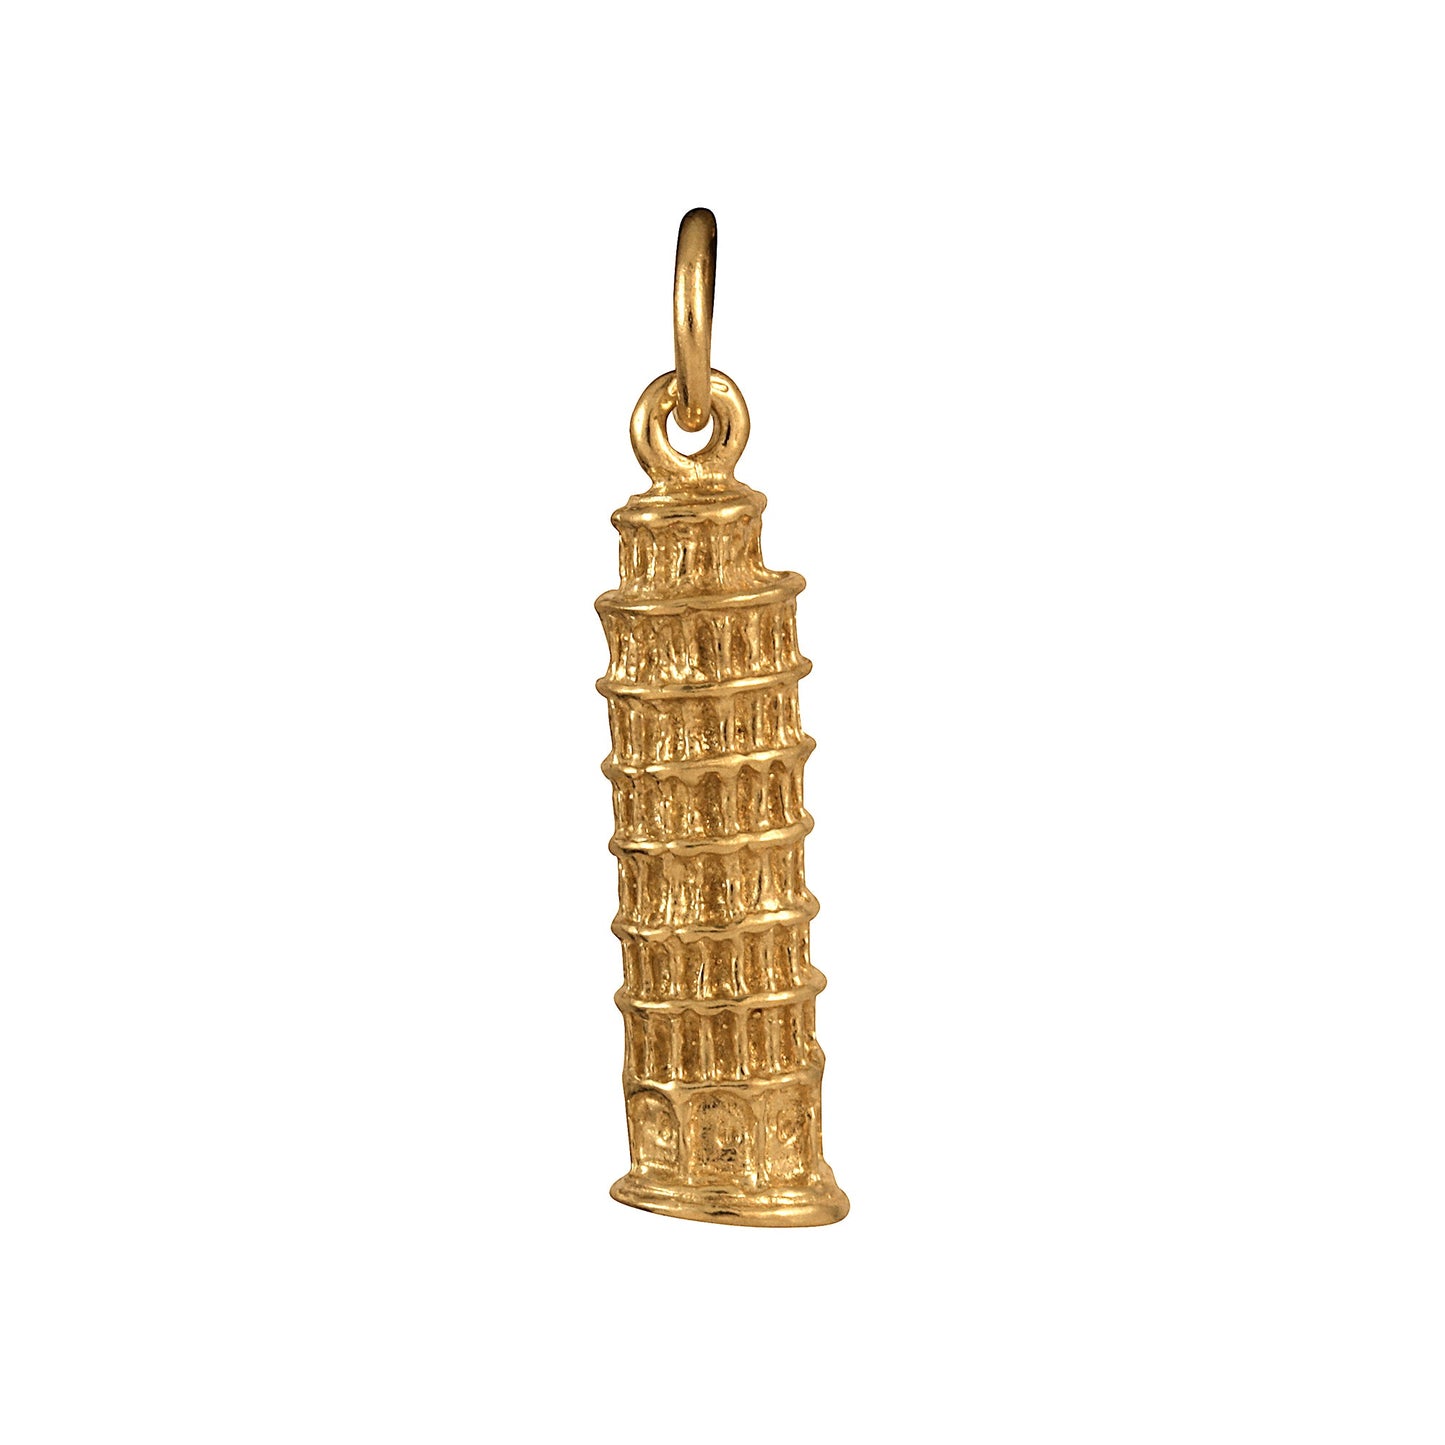 9ct Gold Leaning Tower of Pisa Charm